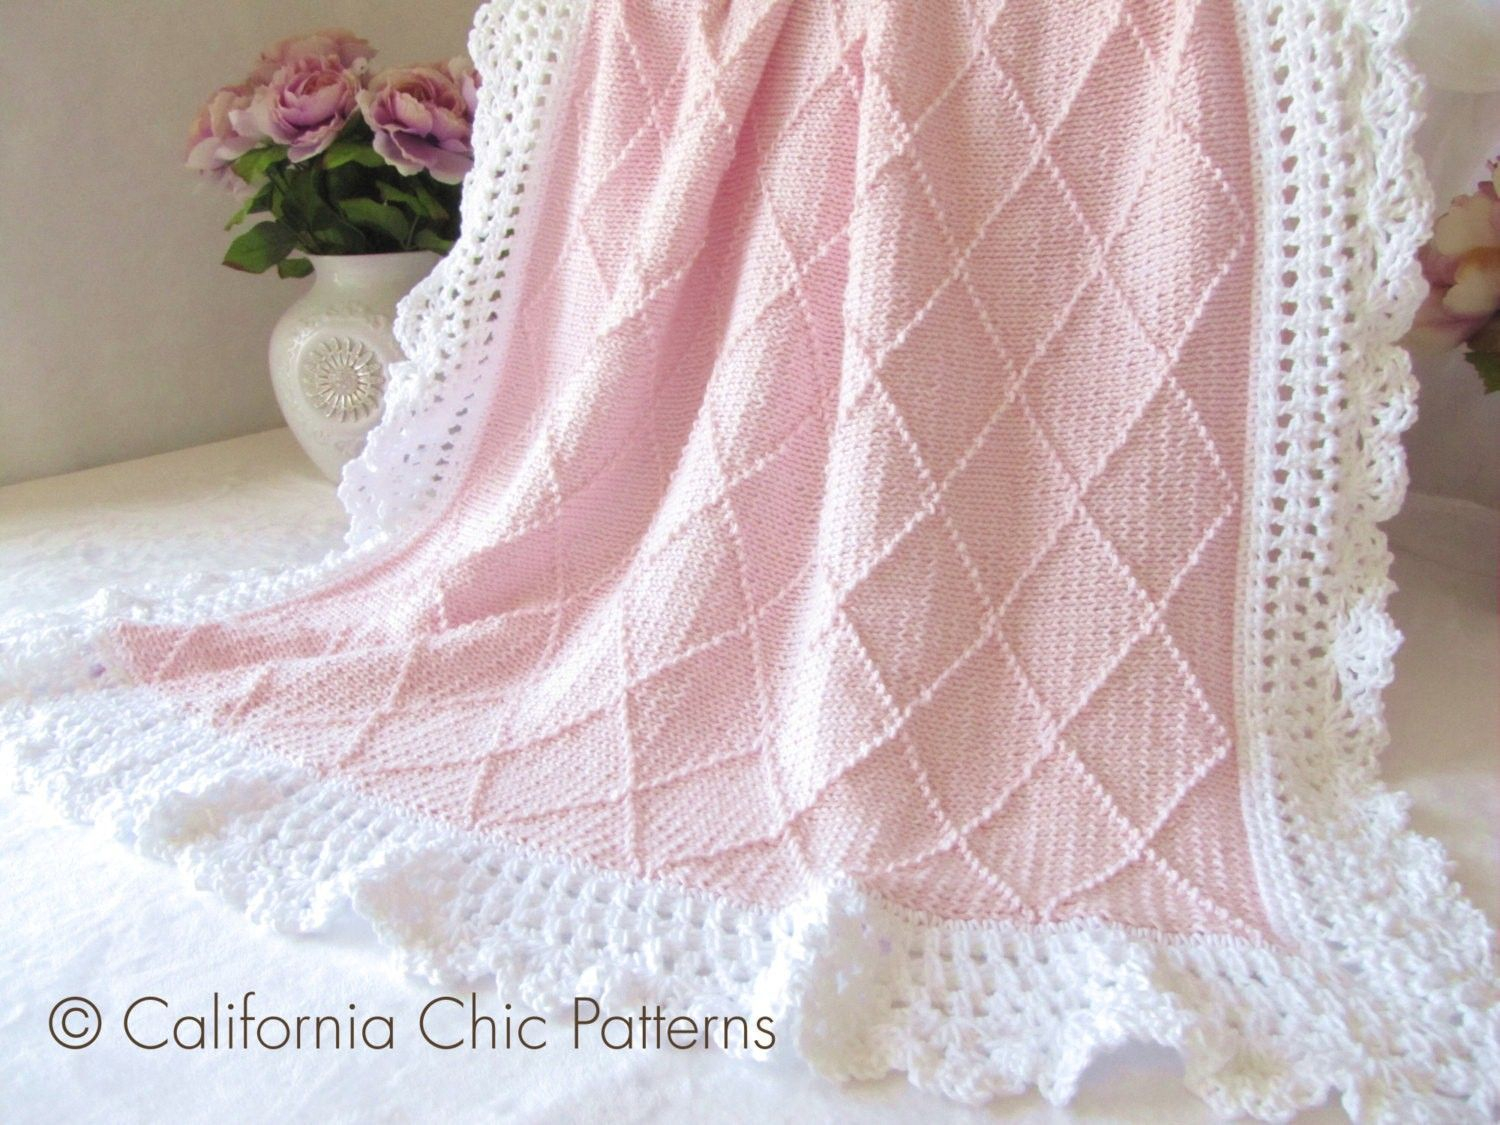 Free Knitted Baby Shawl Patterns Free Knitting Patterns For Ba Blankets Pinterest My Heart Blanket